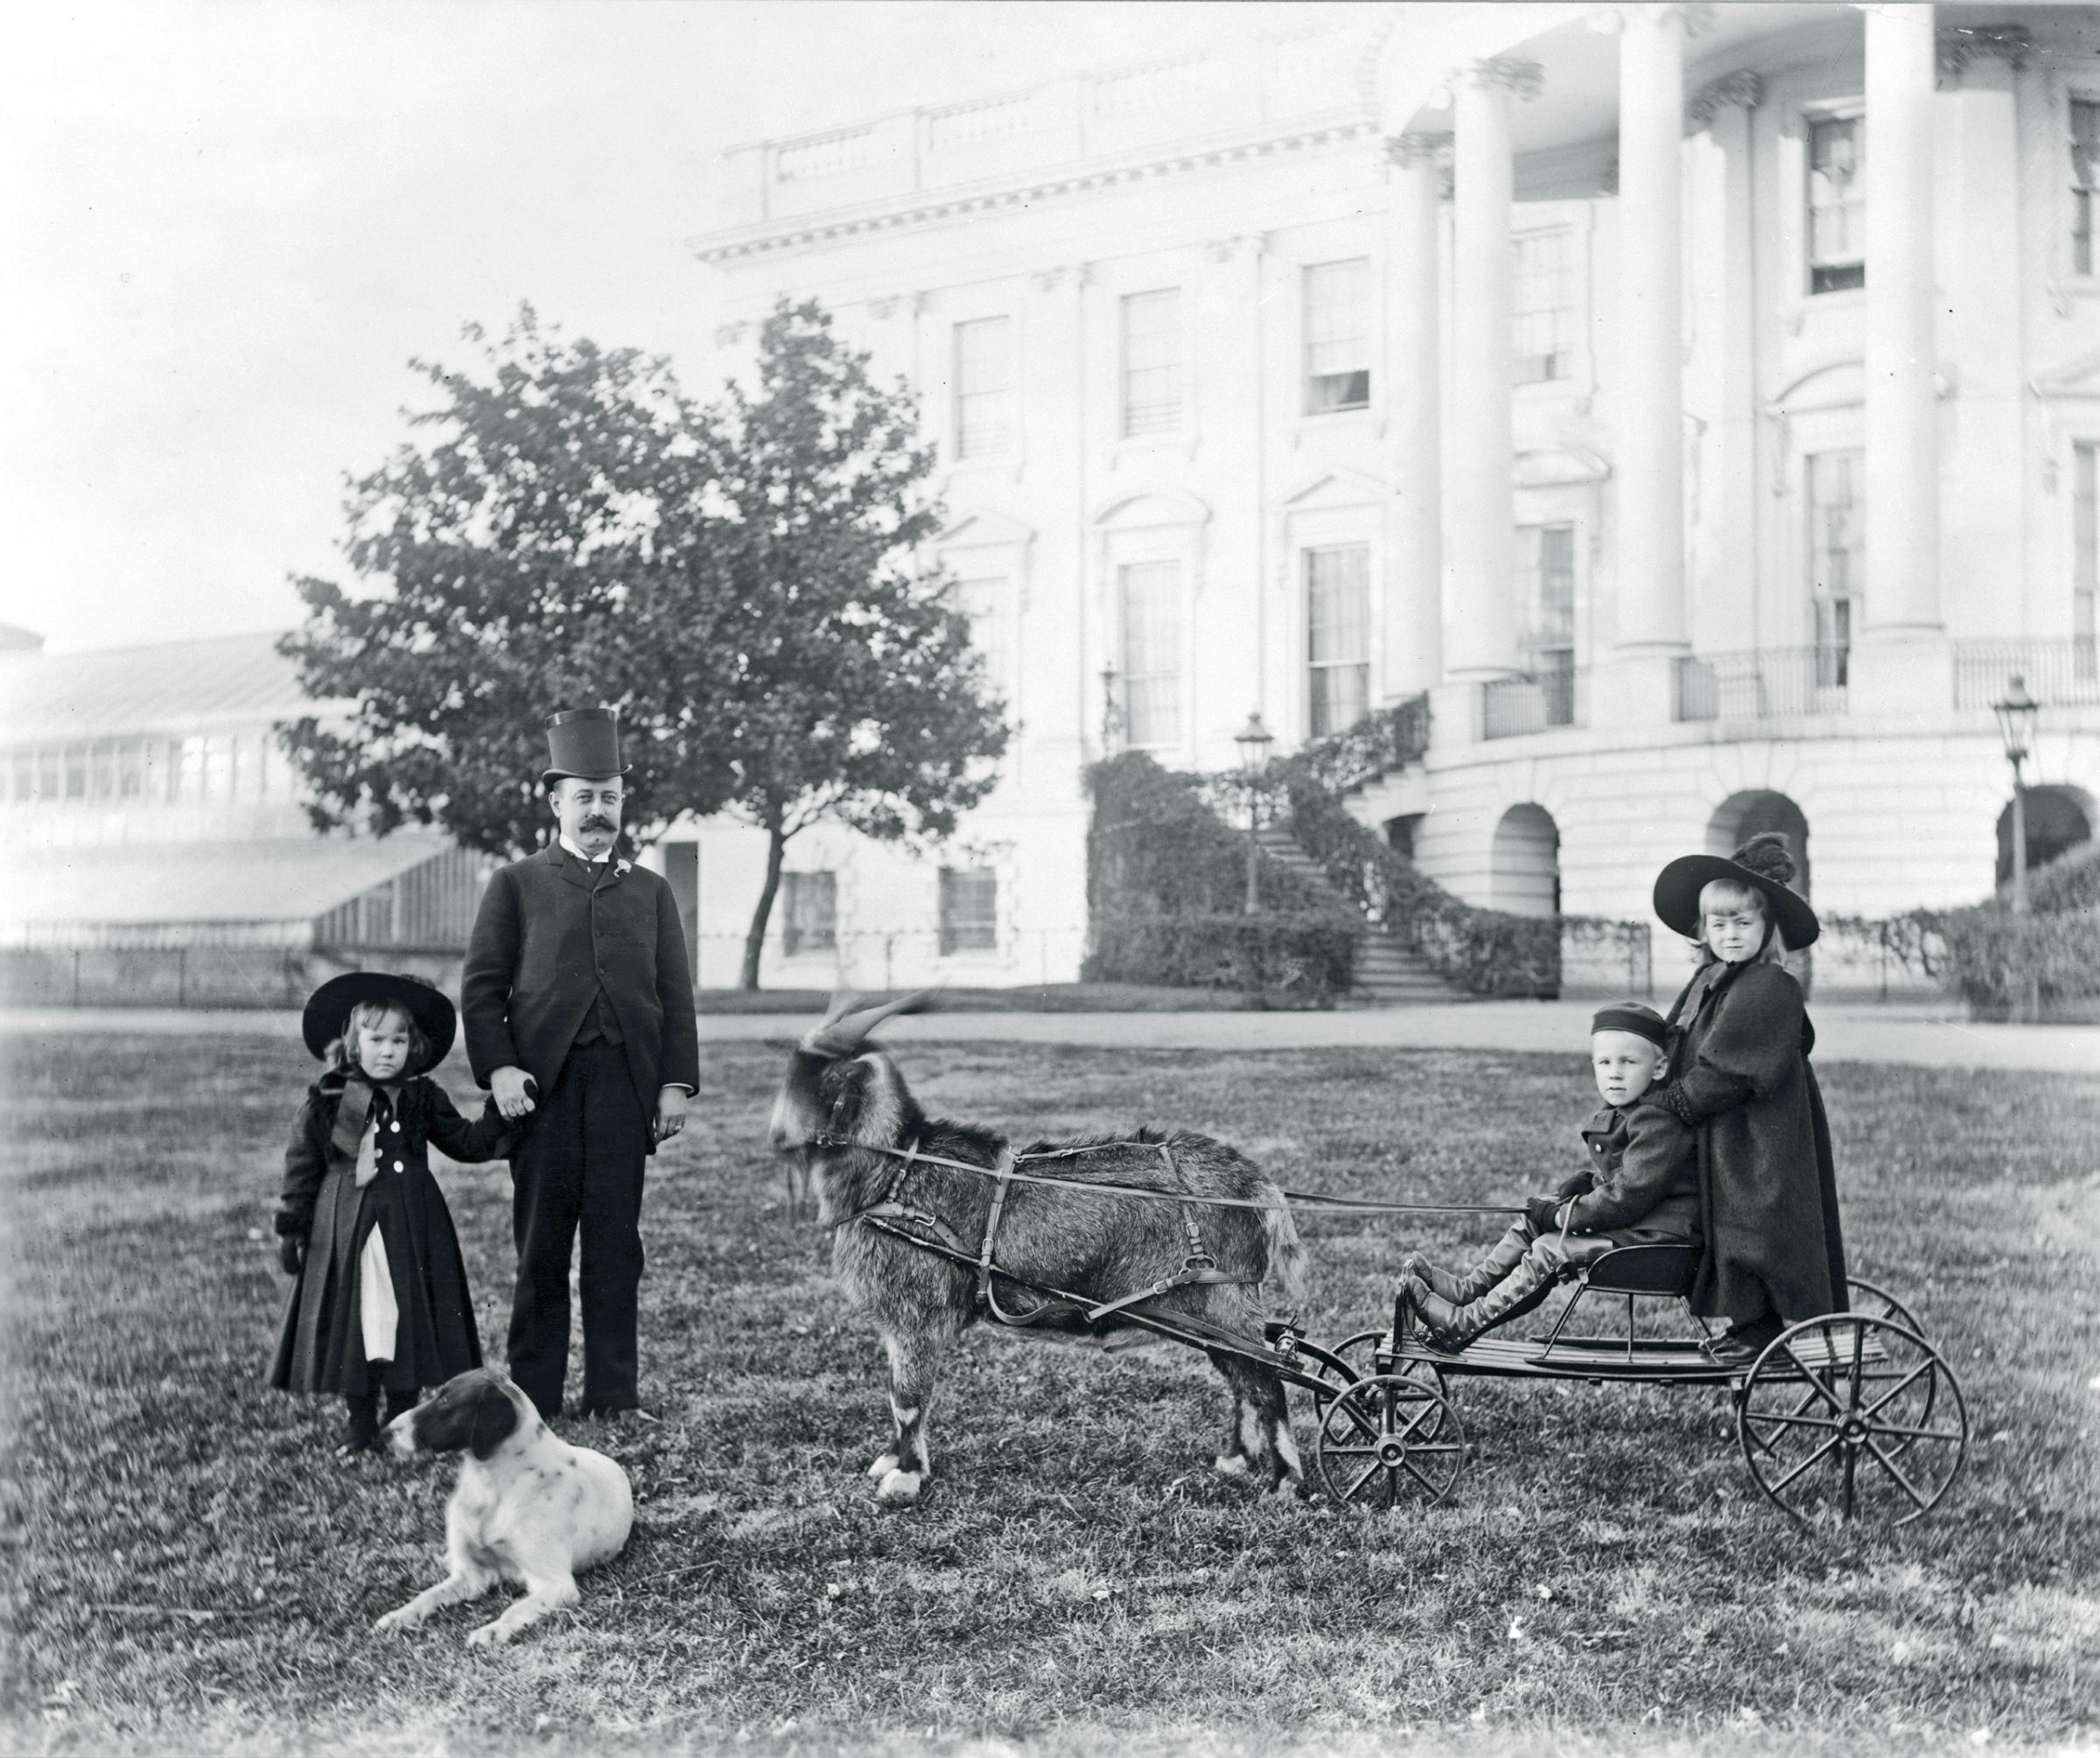 The extended Harrison family enjoyed the White House grounds with their pets and planted several trees.This photograph includes the president's son, Major Russell Harrison, and three grandchildren along with their goat, Old Whiskers, and one of their dogs.